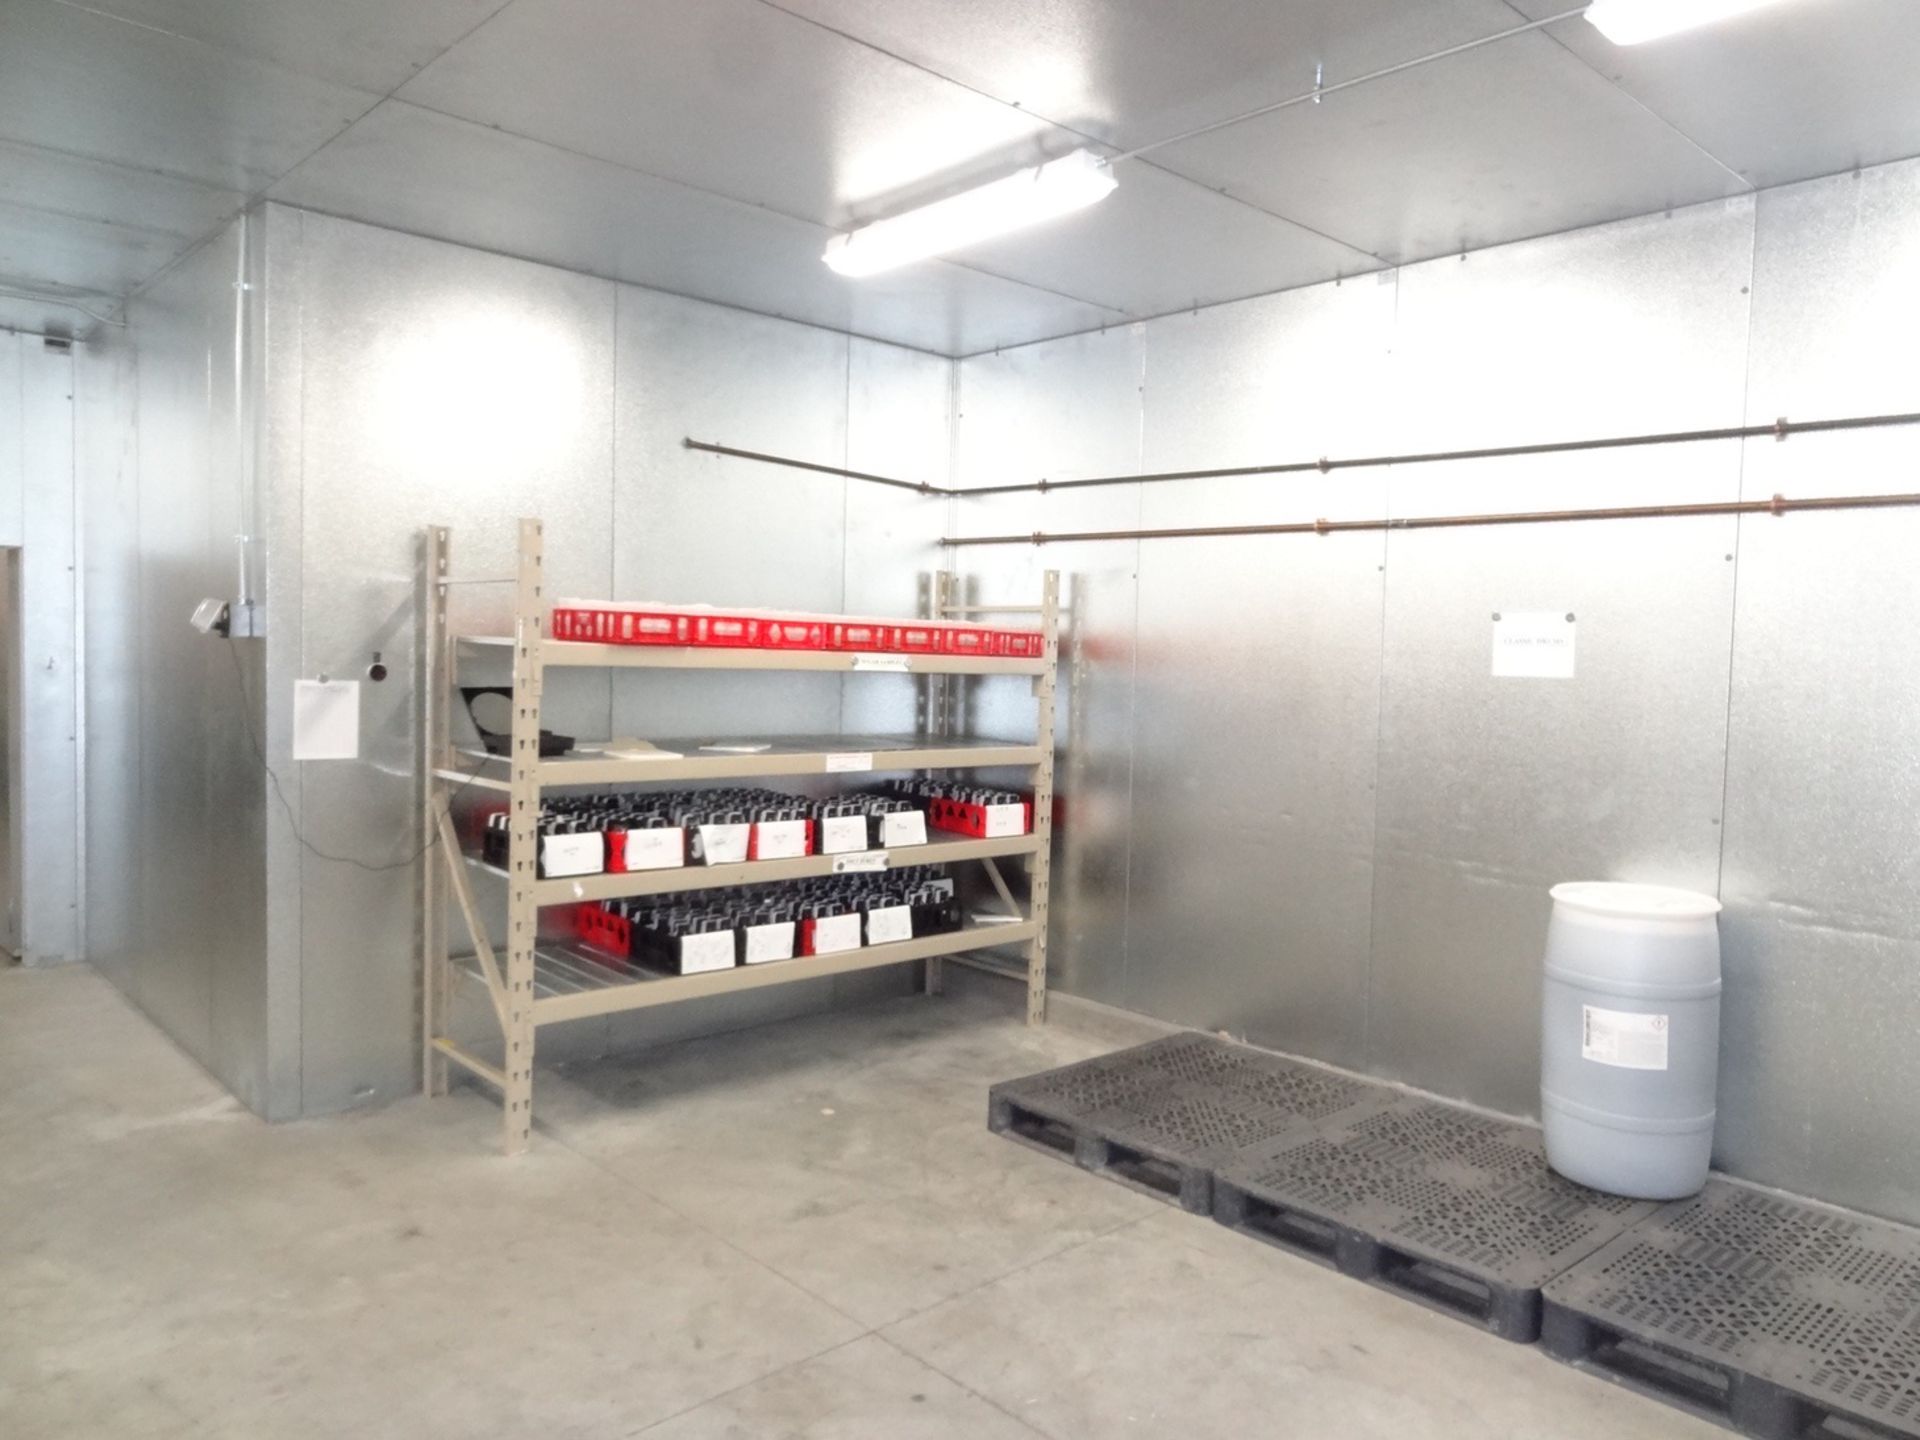 Crown Tonka Cold Storage Room, Flammable Section, 20Ft X 50Ft, Main Ro | Rigging Fee: Contact Rigger - Image 4 of 7